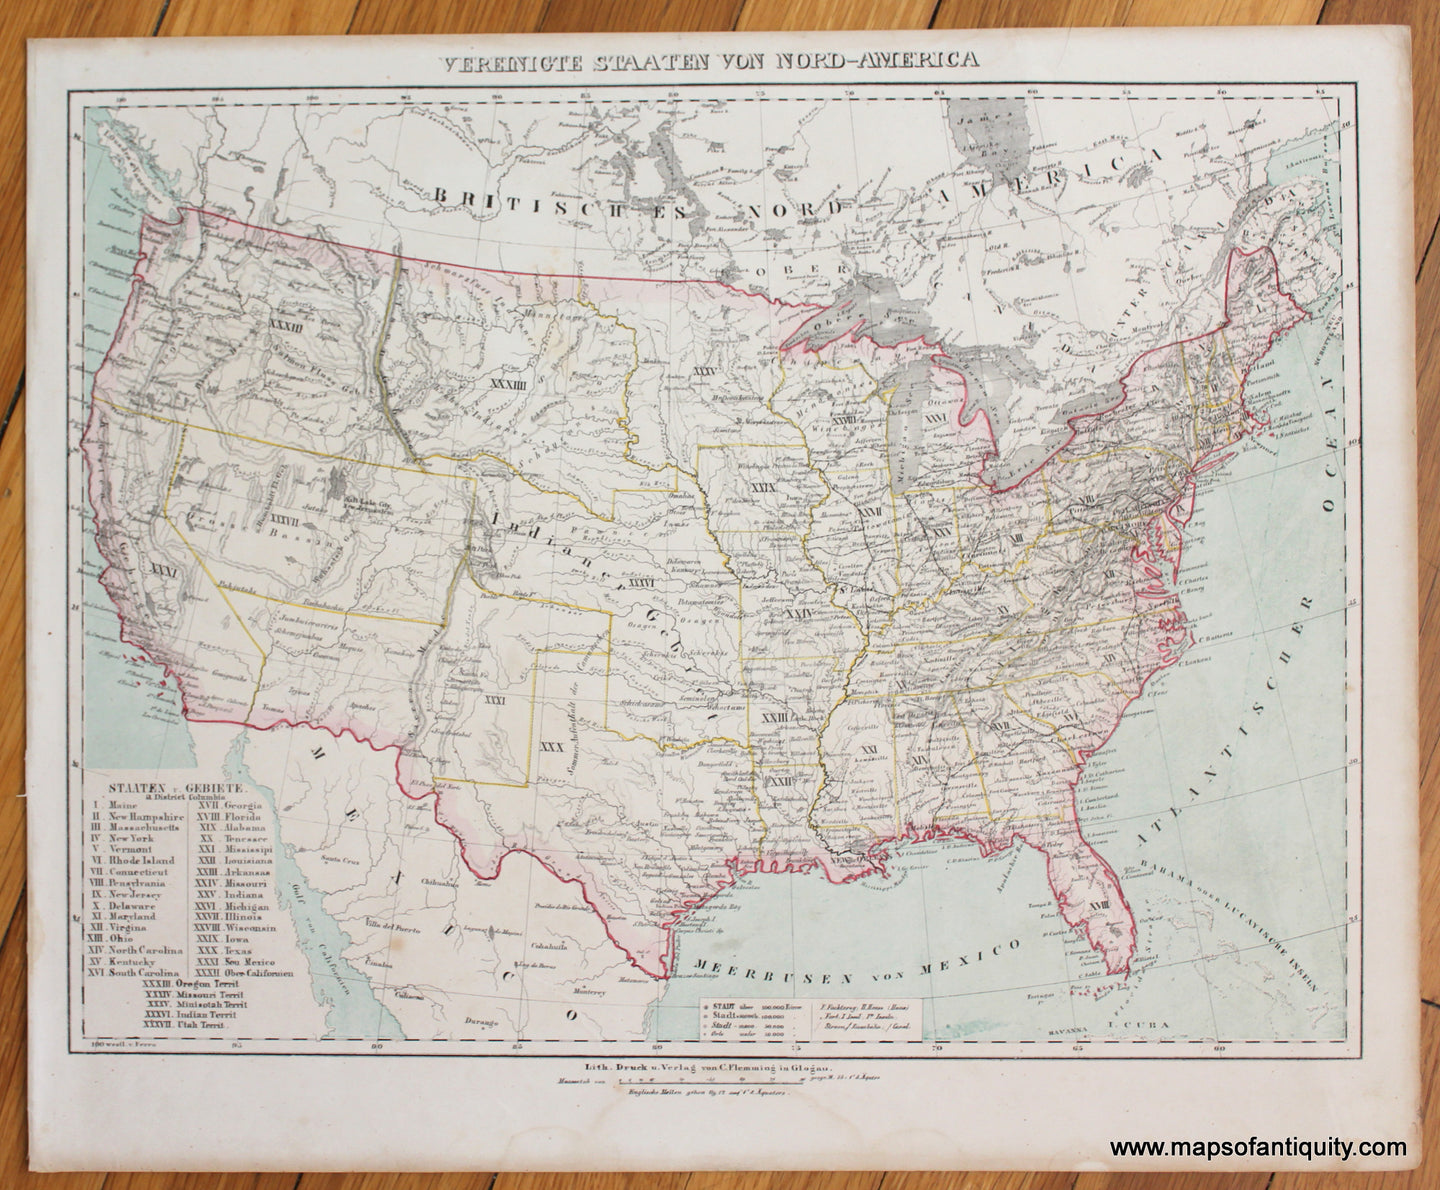 Antique-Map-United-States-Vereinigte-Staaten-Nord-America-US-USA-Flemming-1845-1840s-1800s